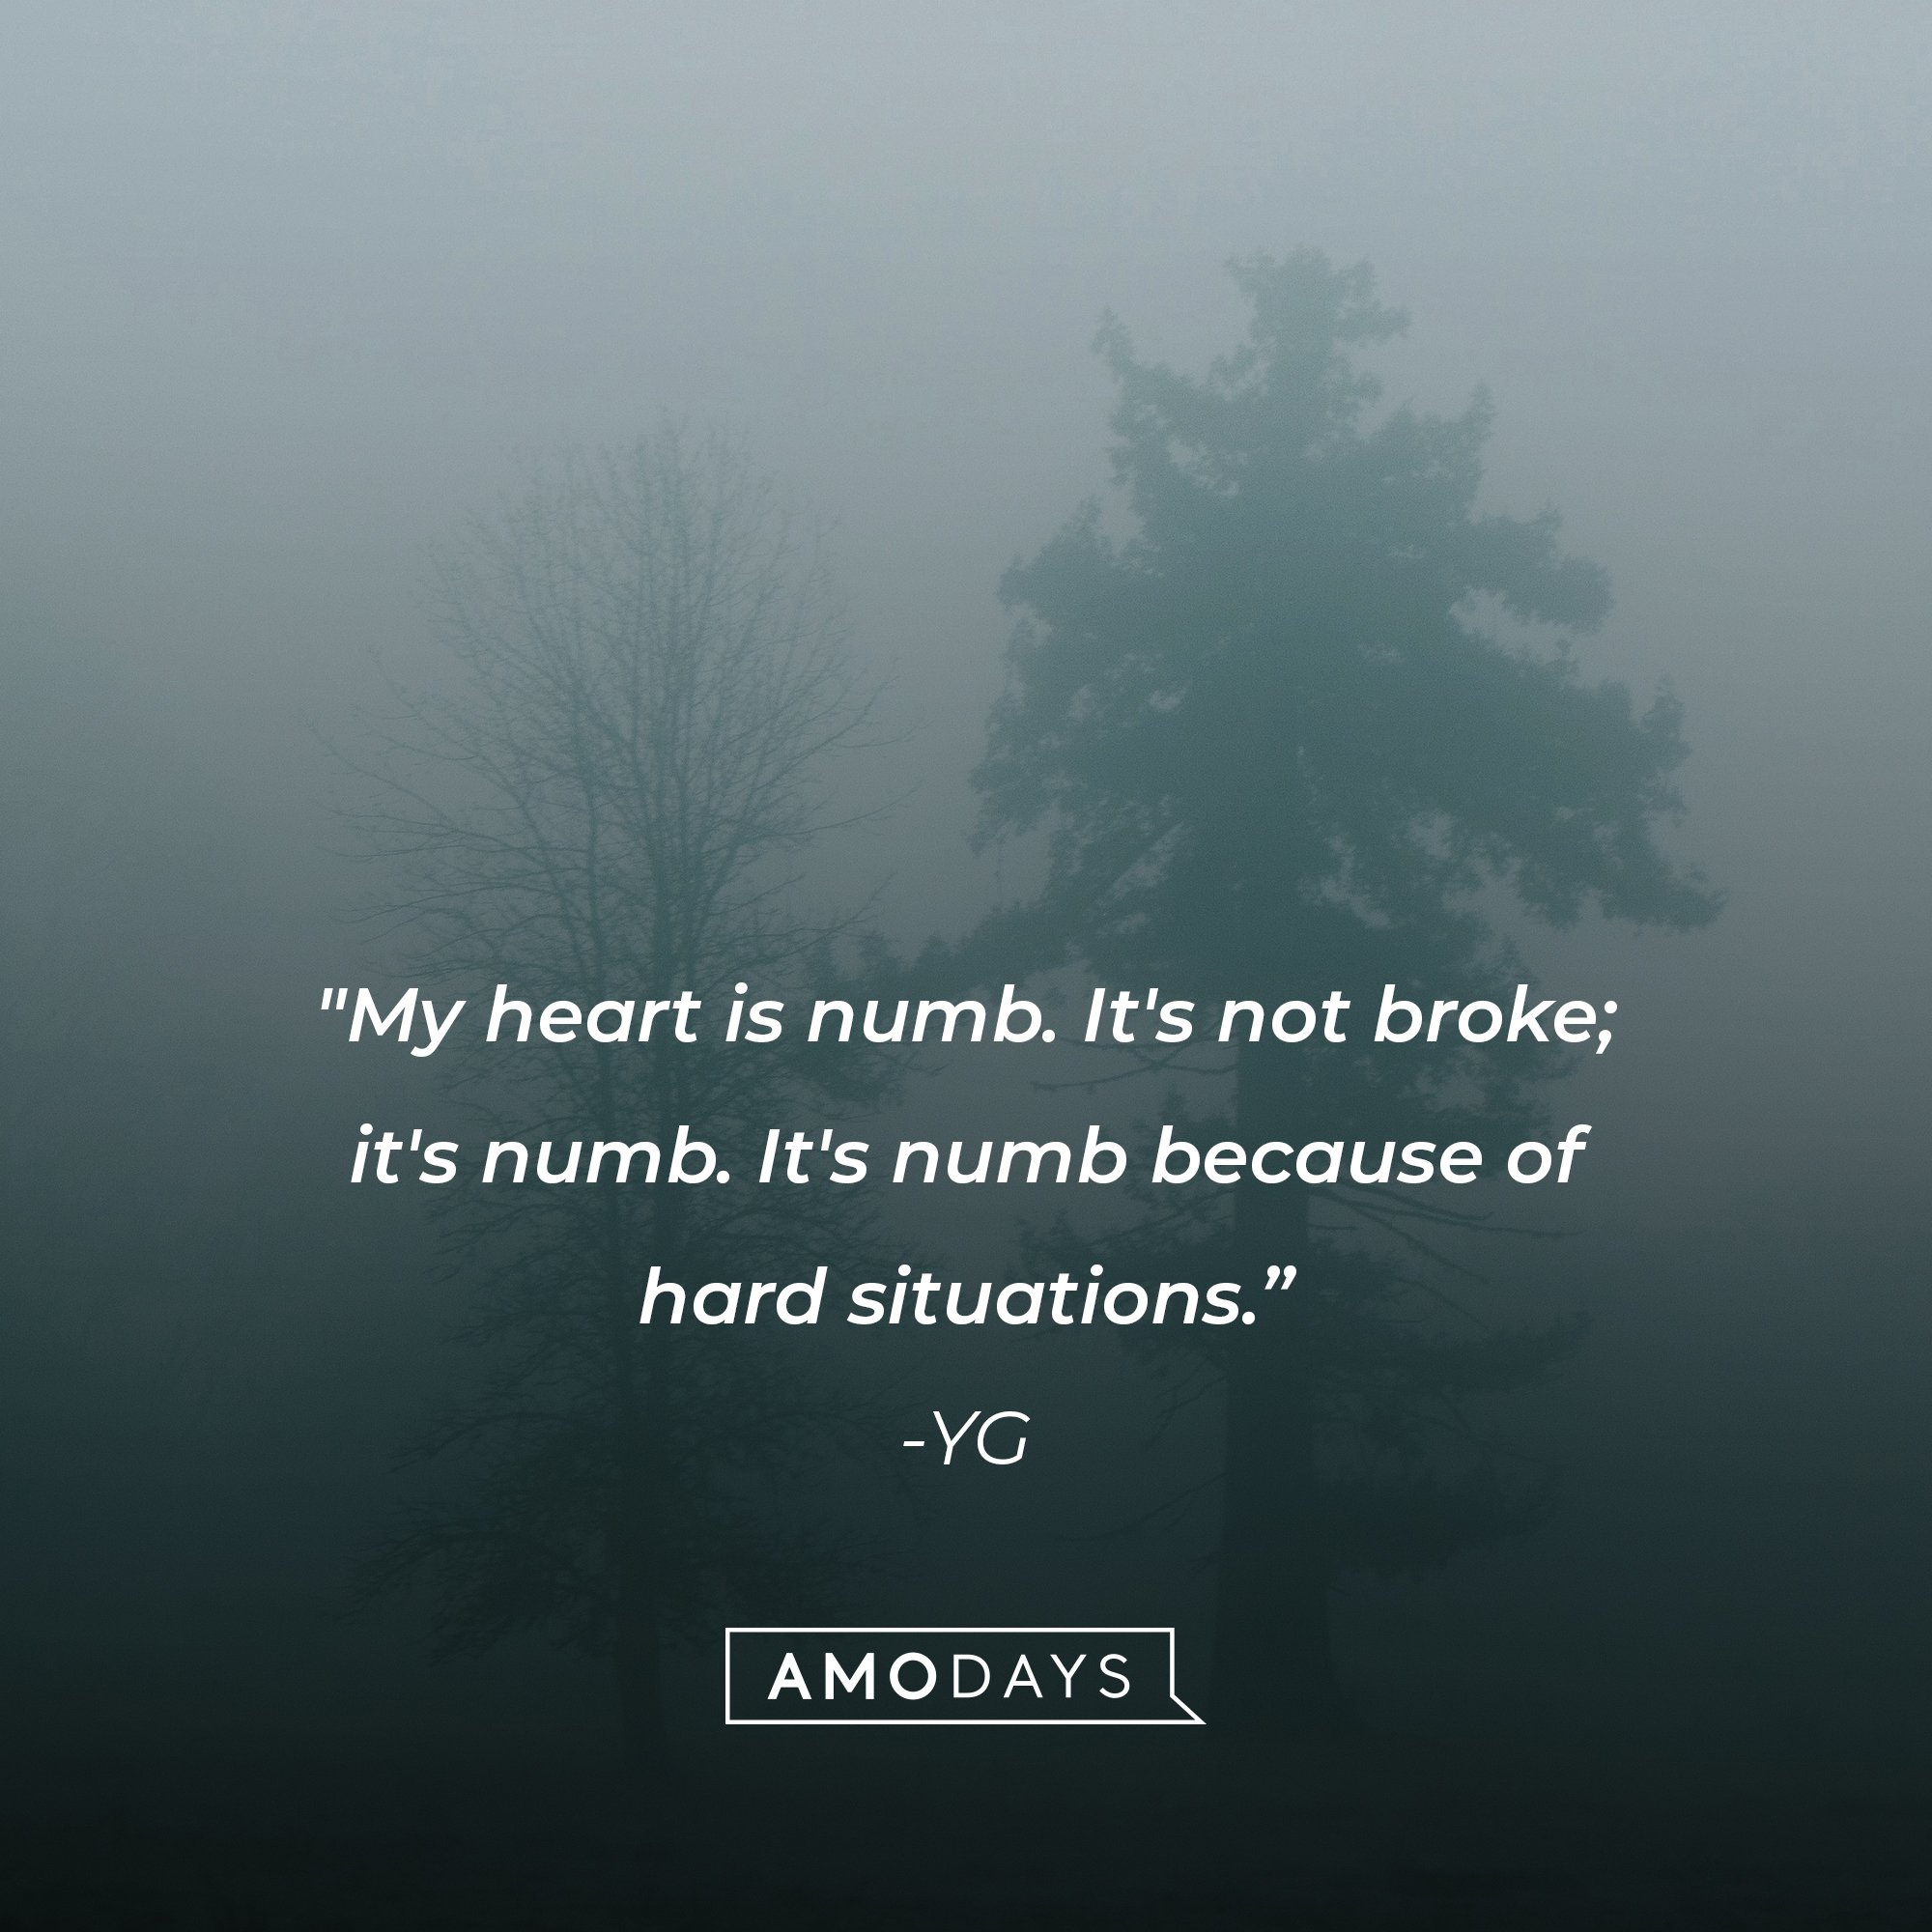  YG’s quote: "My heart is numb. It's not broke; it's numb. It's numb because of hard situations.”  | Image: AmoDays 